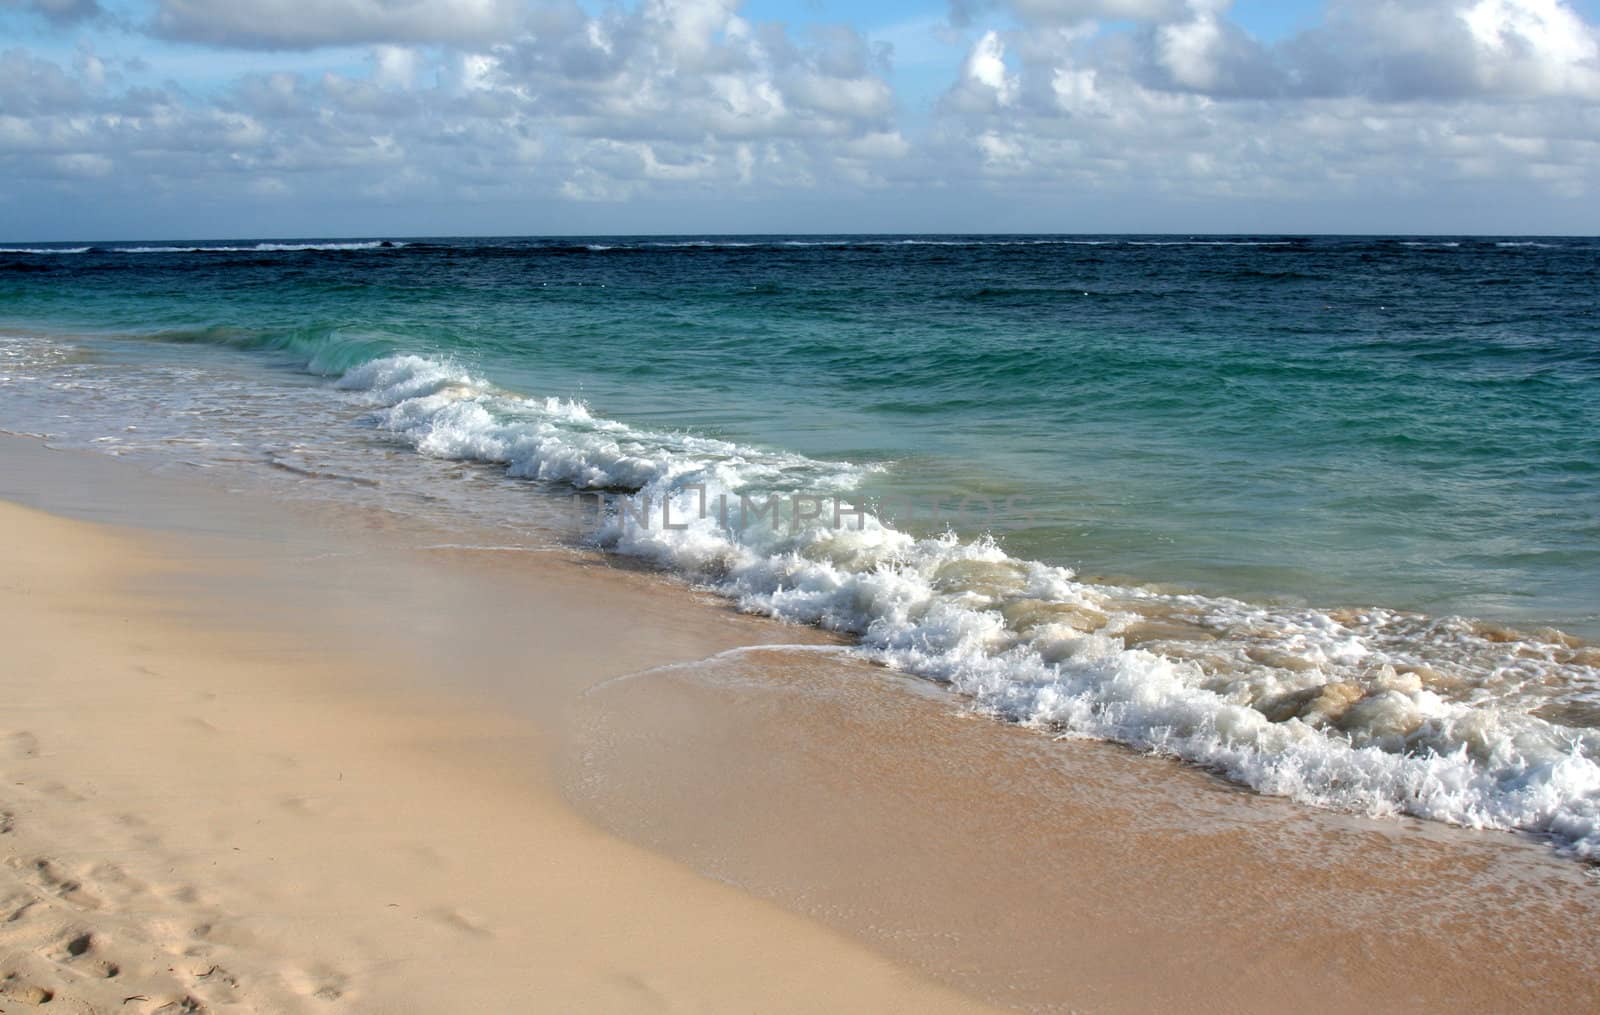 The beautiful beach of Punta Cana, Dominican Republic.  Shot a couple hours after dawn.
